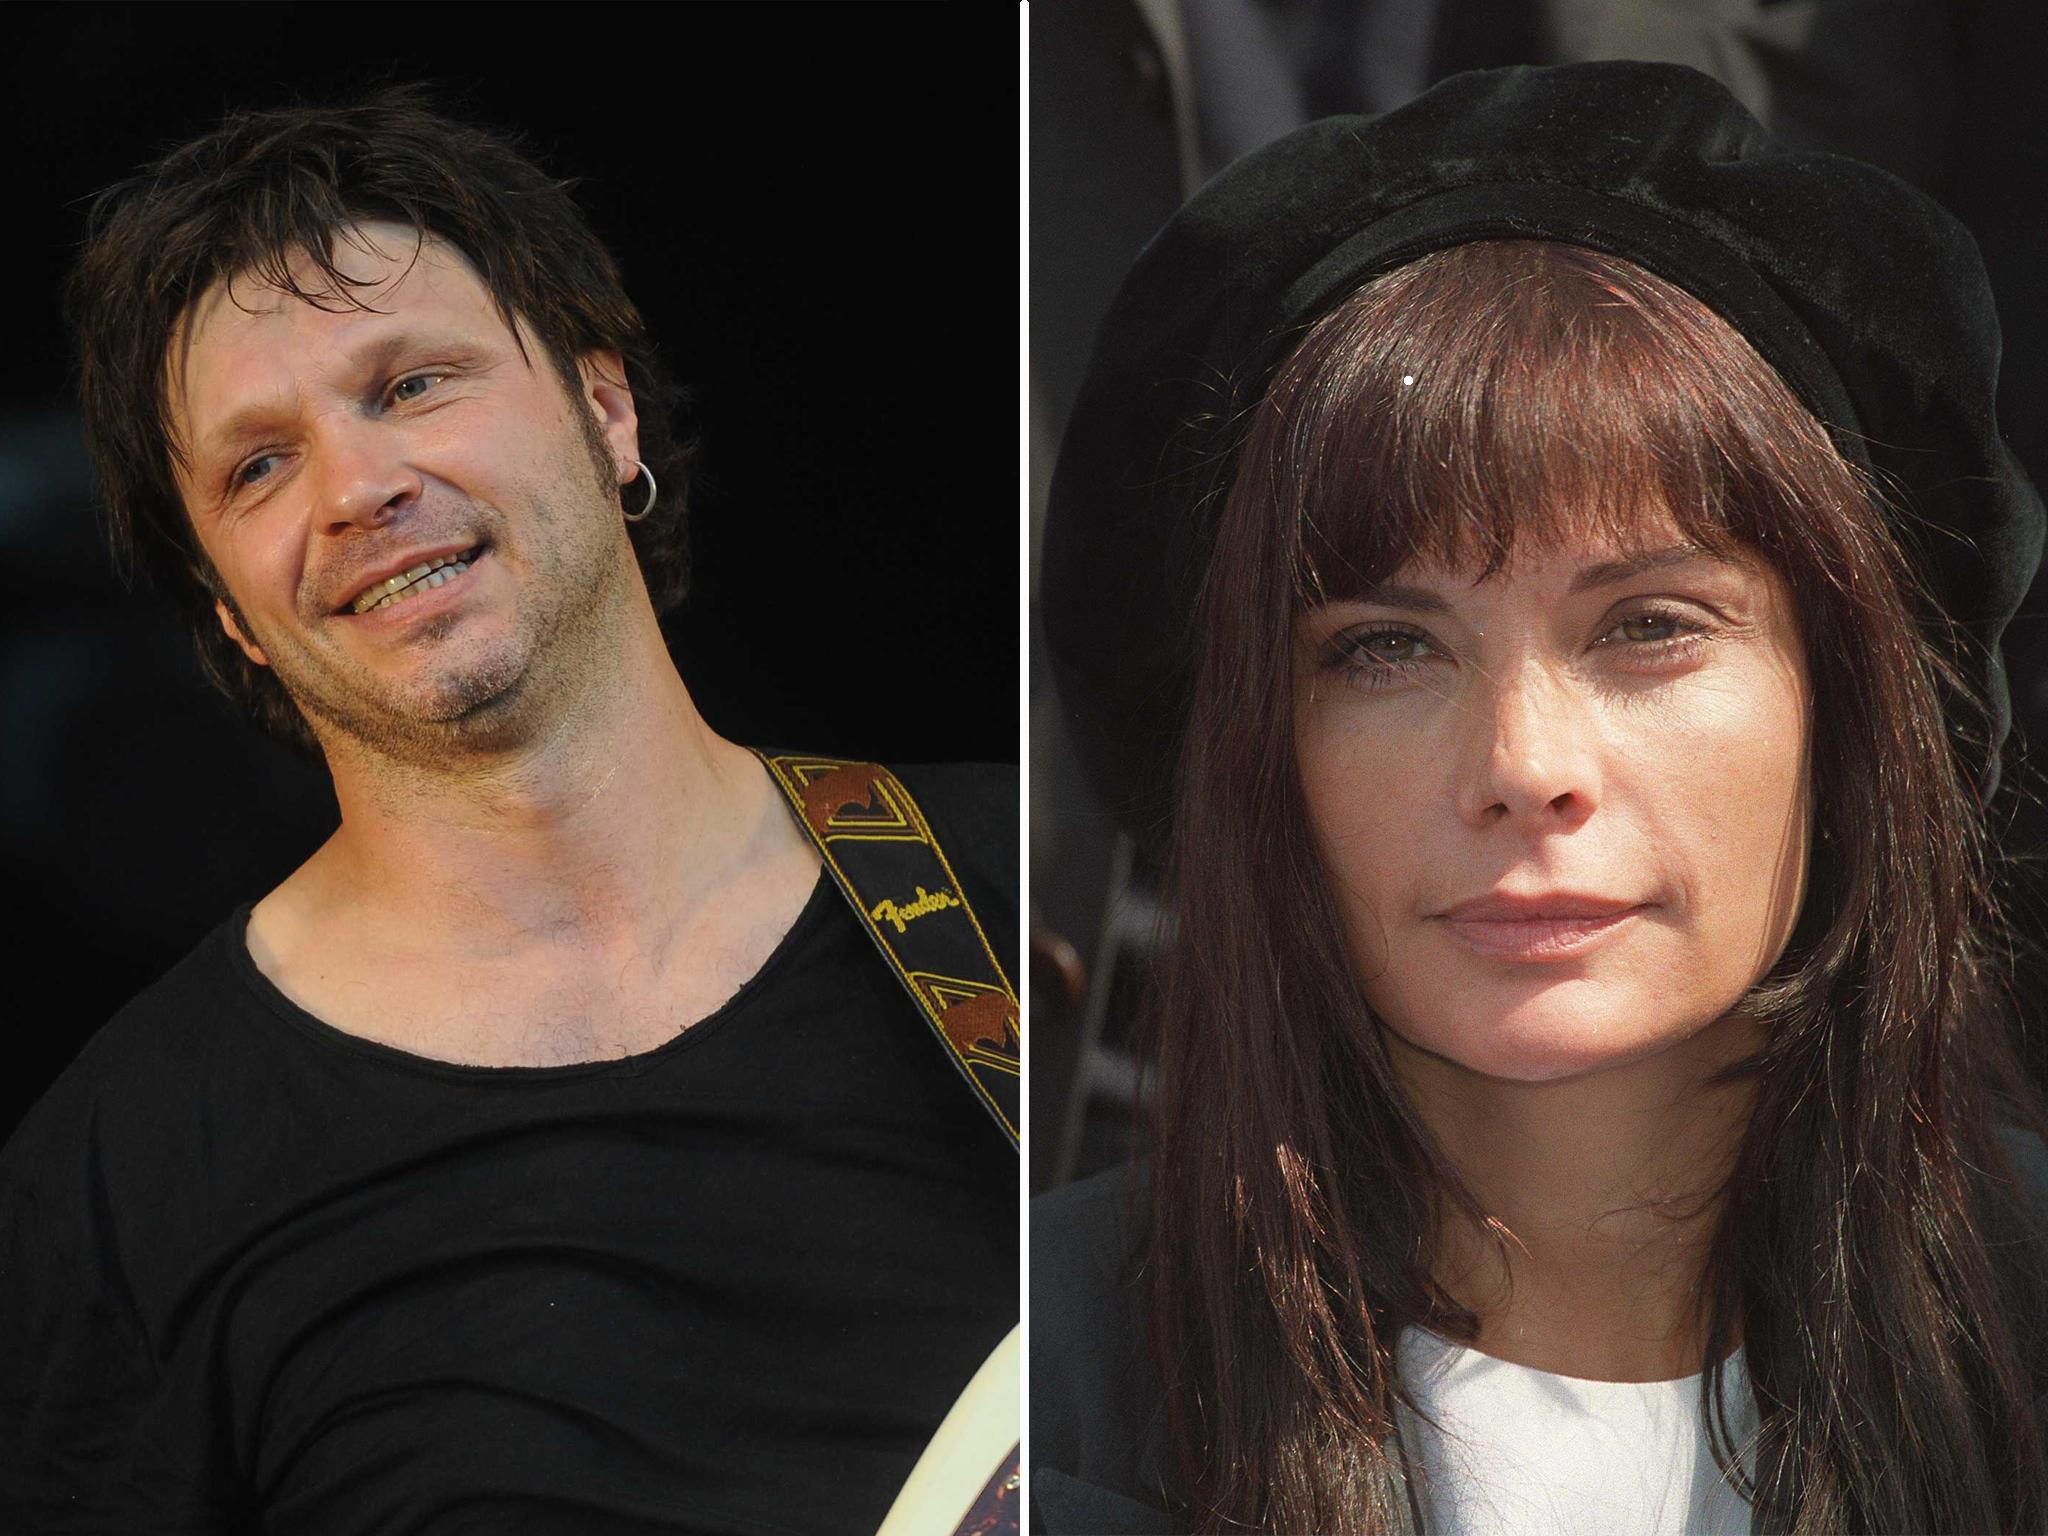 Bertrand Cantat was convicted of the murder of his then-girlfriend Marie Trintignant in 2003